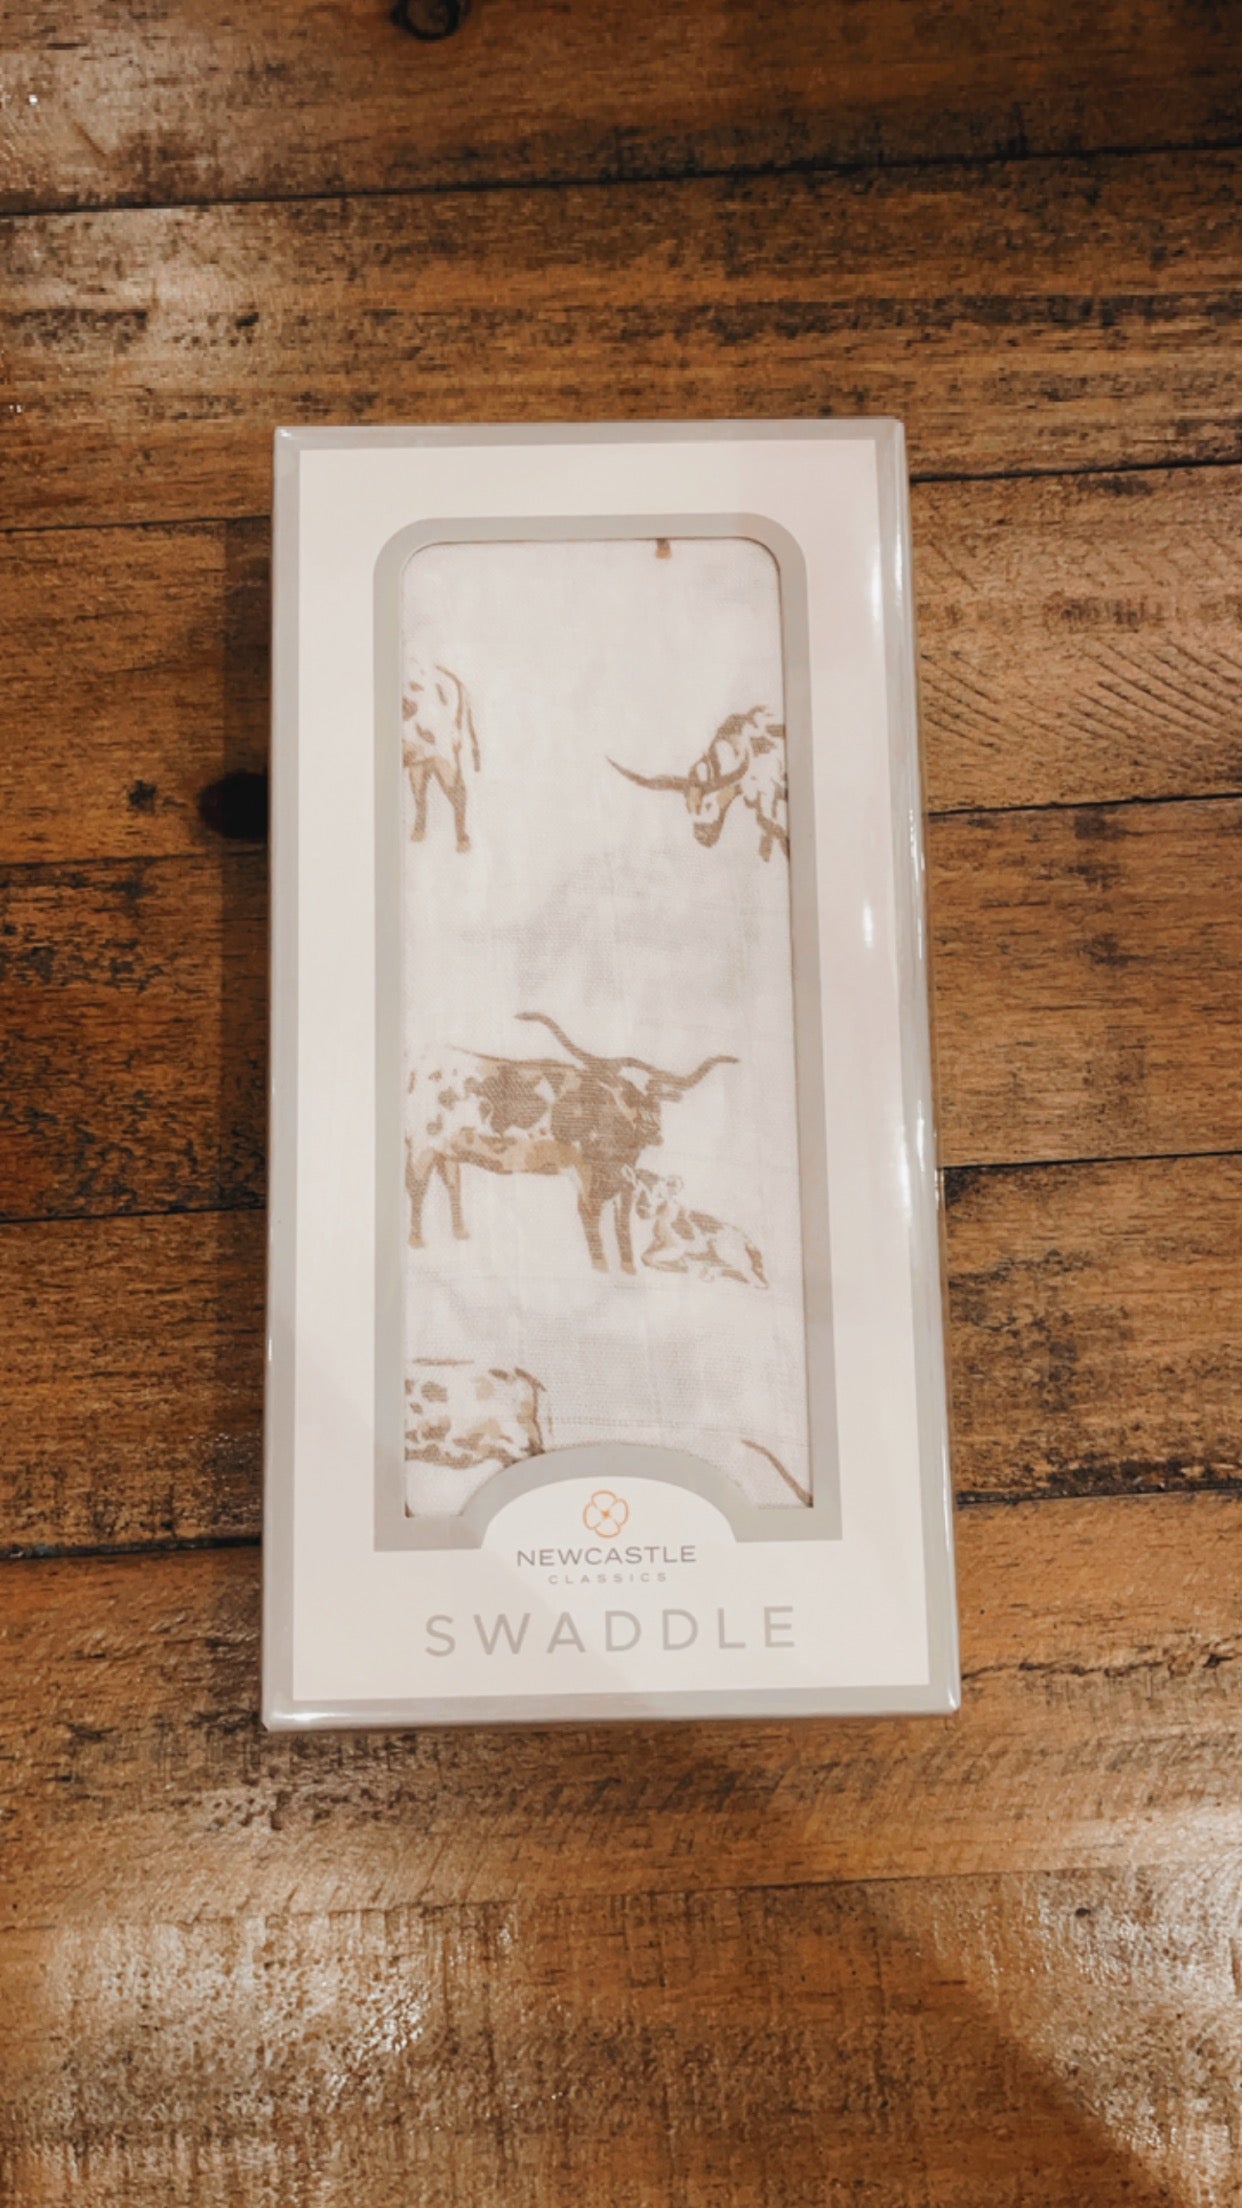 The Western Swaddles